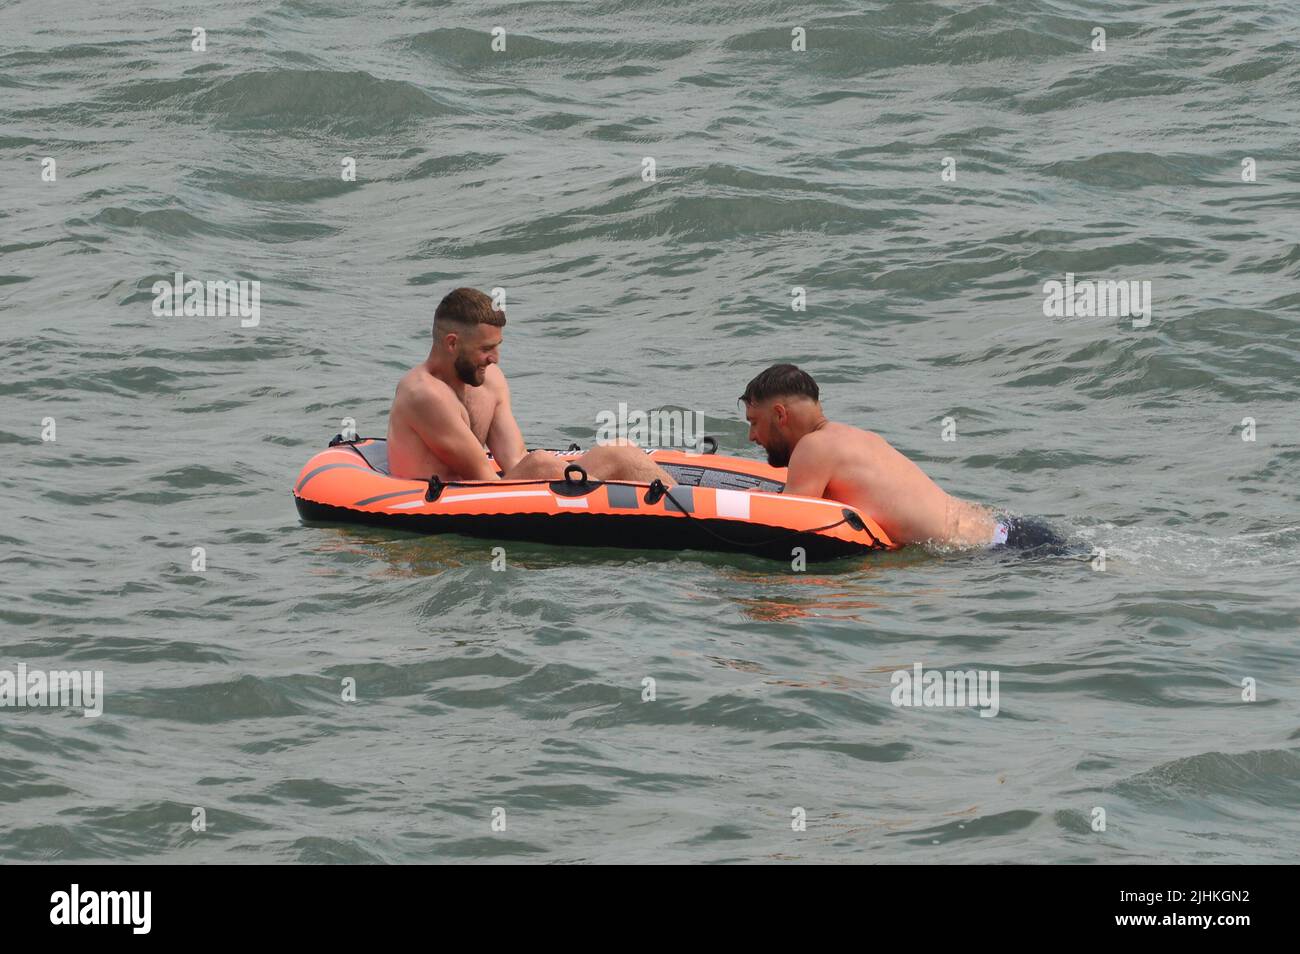 Boscombe, Bournemouth, Dorset, England, UK, 19th July 2022, Weather. The end is nigh for record breaking heatwave. Dark clouds and a rain shower over a busy beach in the afternoon. Two men in a dinghy stick to the plan. Credit: Paul Biggins/Alamy Live News Stock Photo